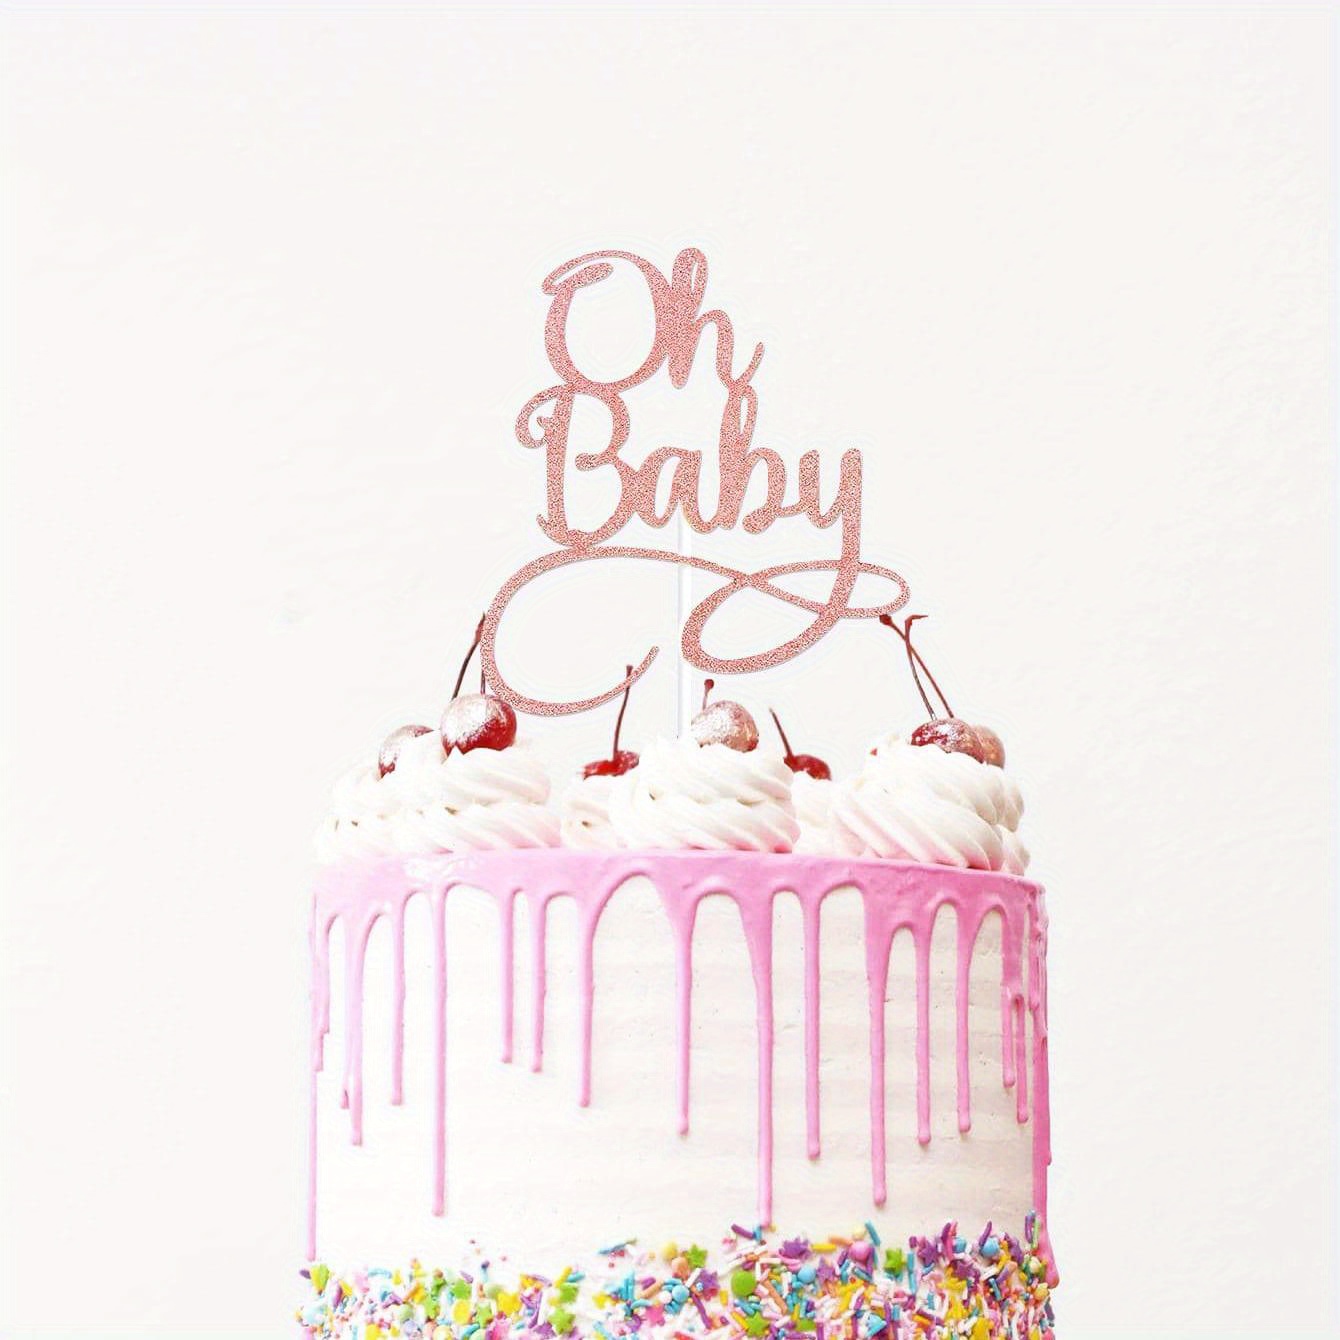 Baby Shower Cake Toppers - Cake Decorations Australia